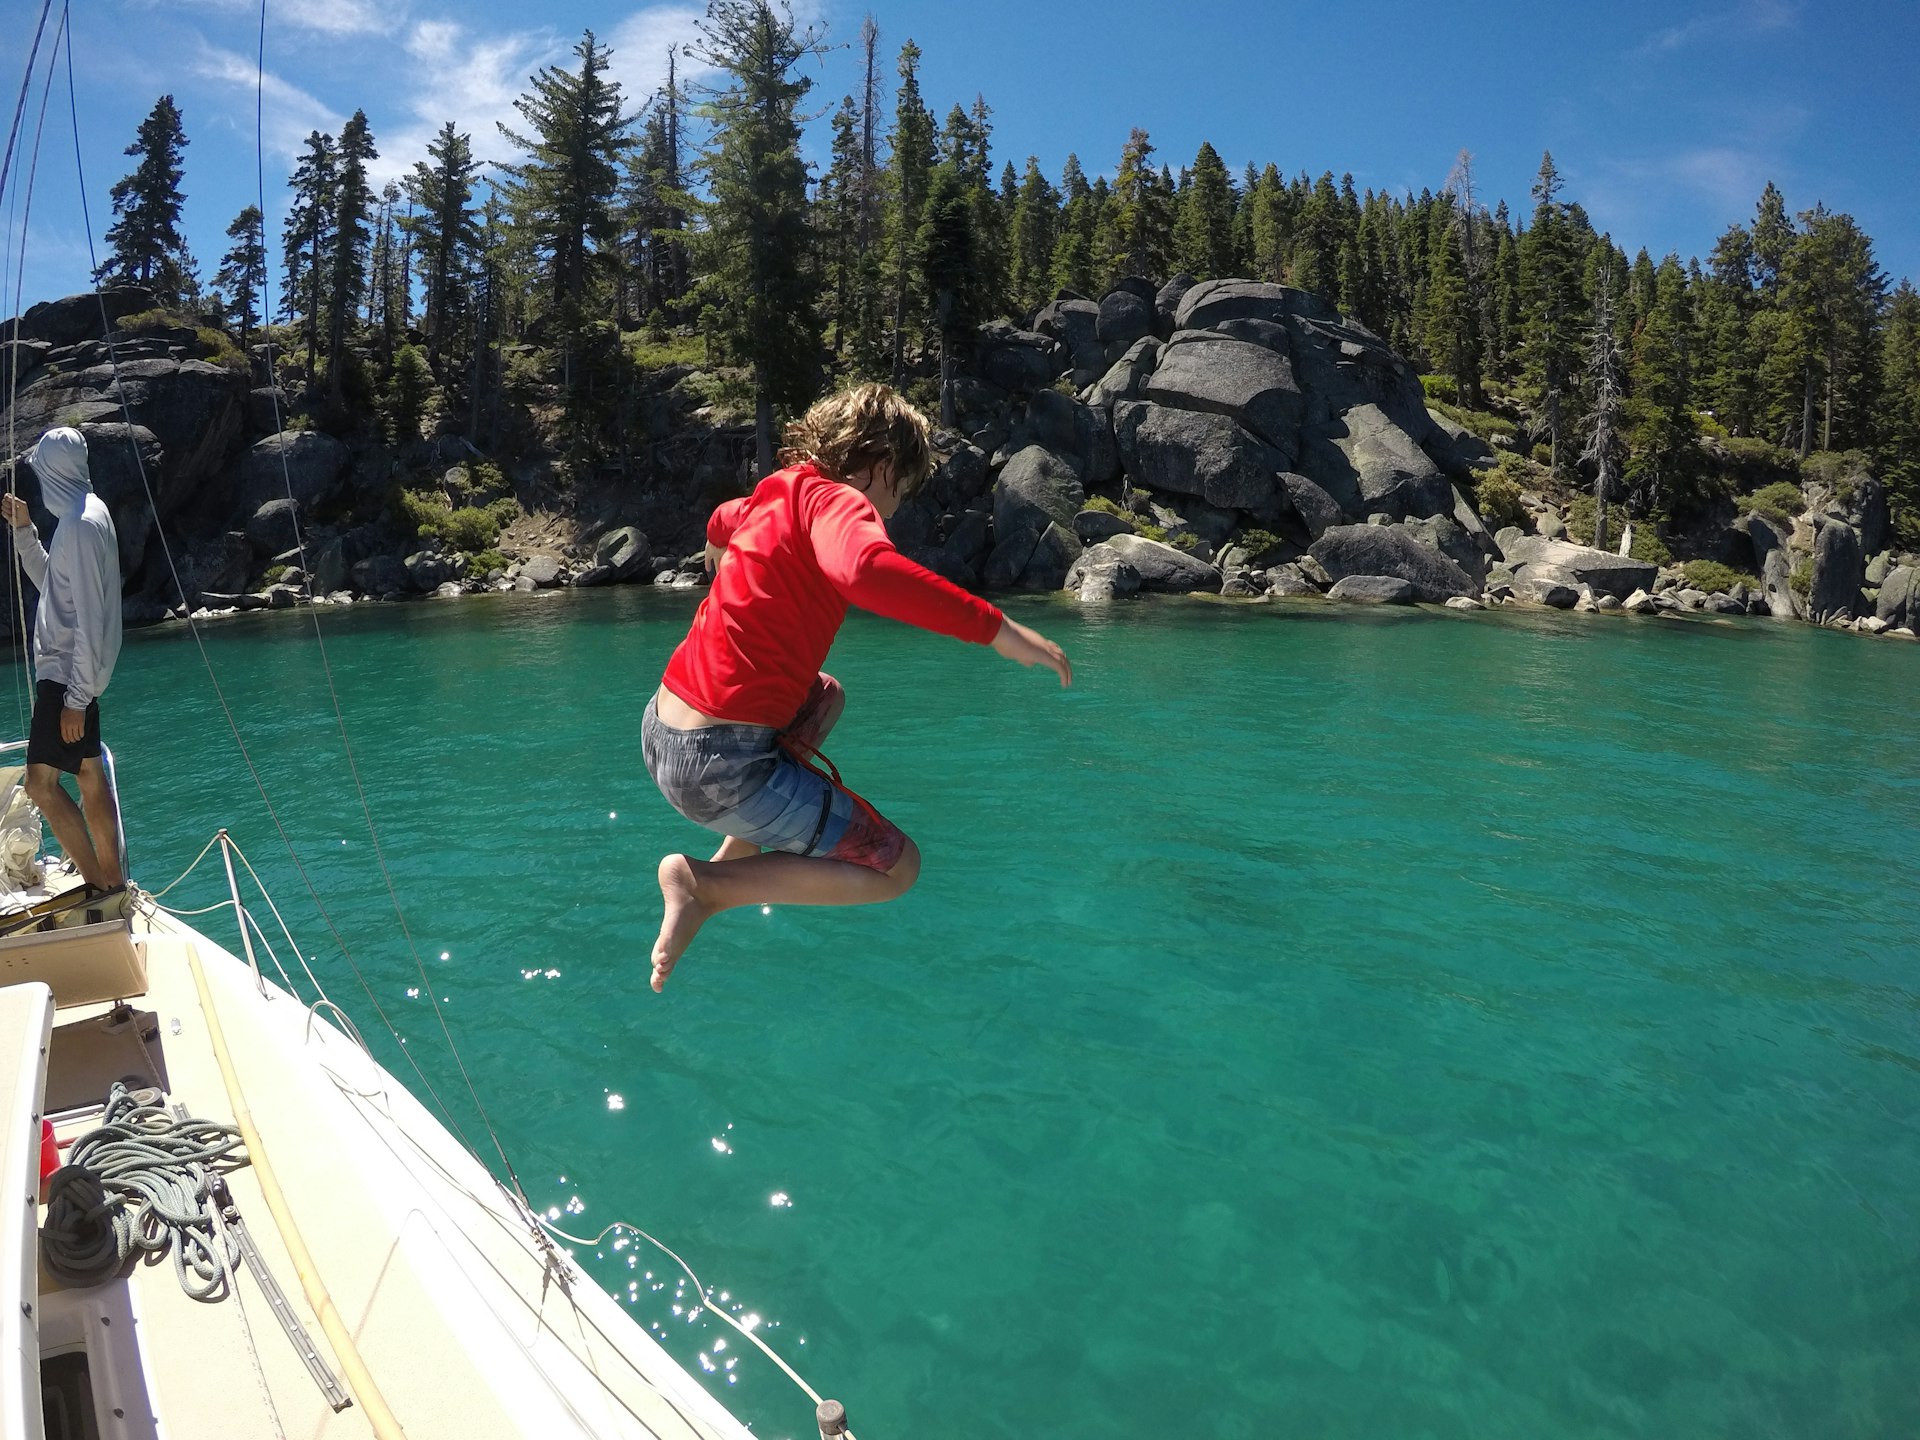 A child jumps into the water at Emerald Bay, Lake Tahoe, California, USA